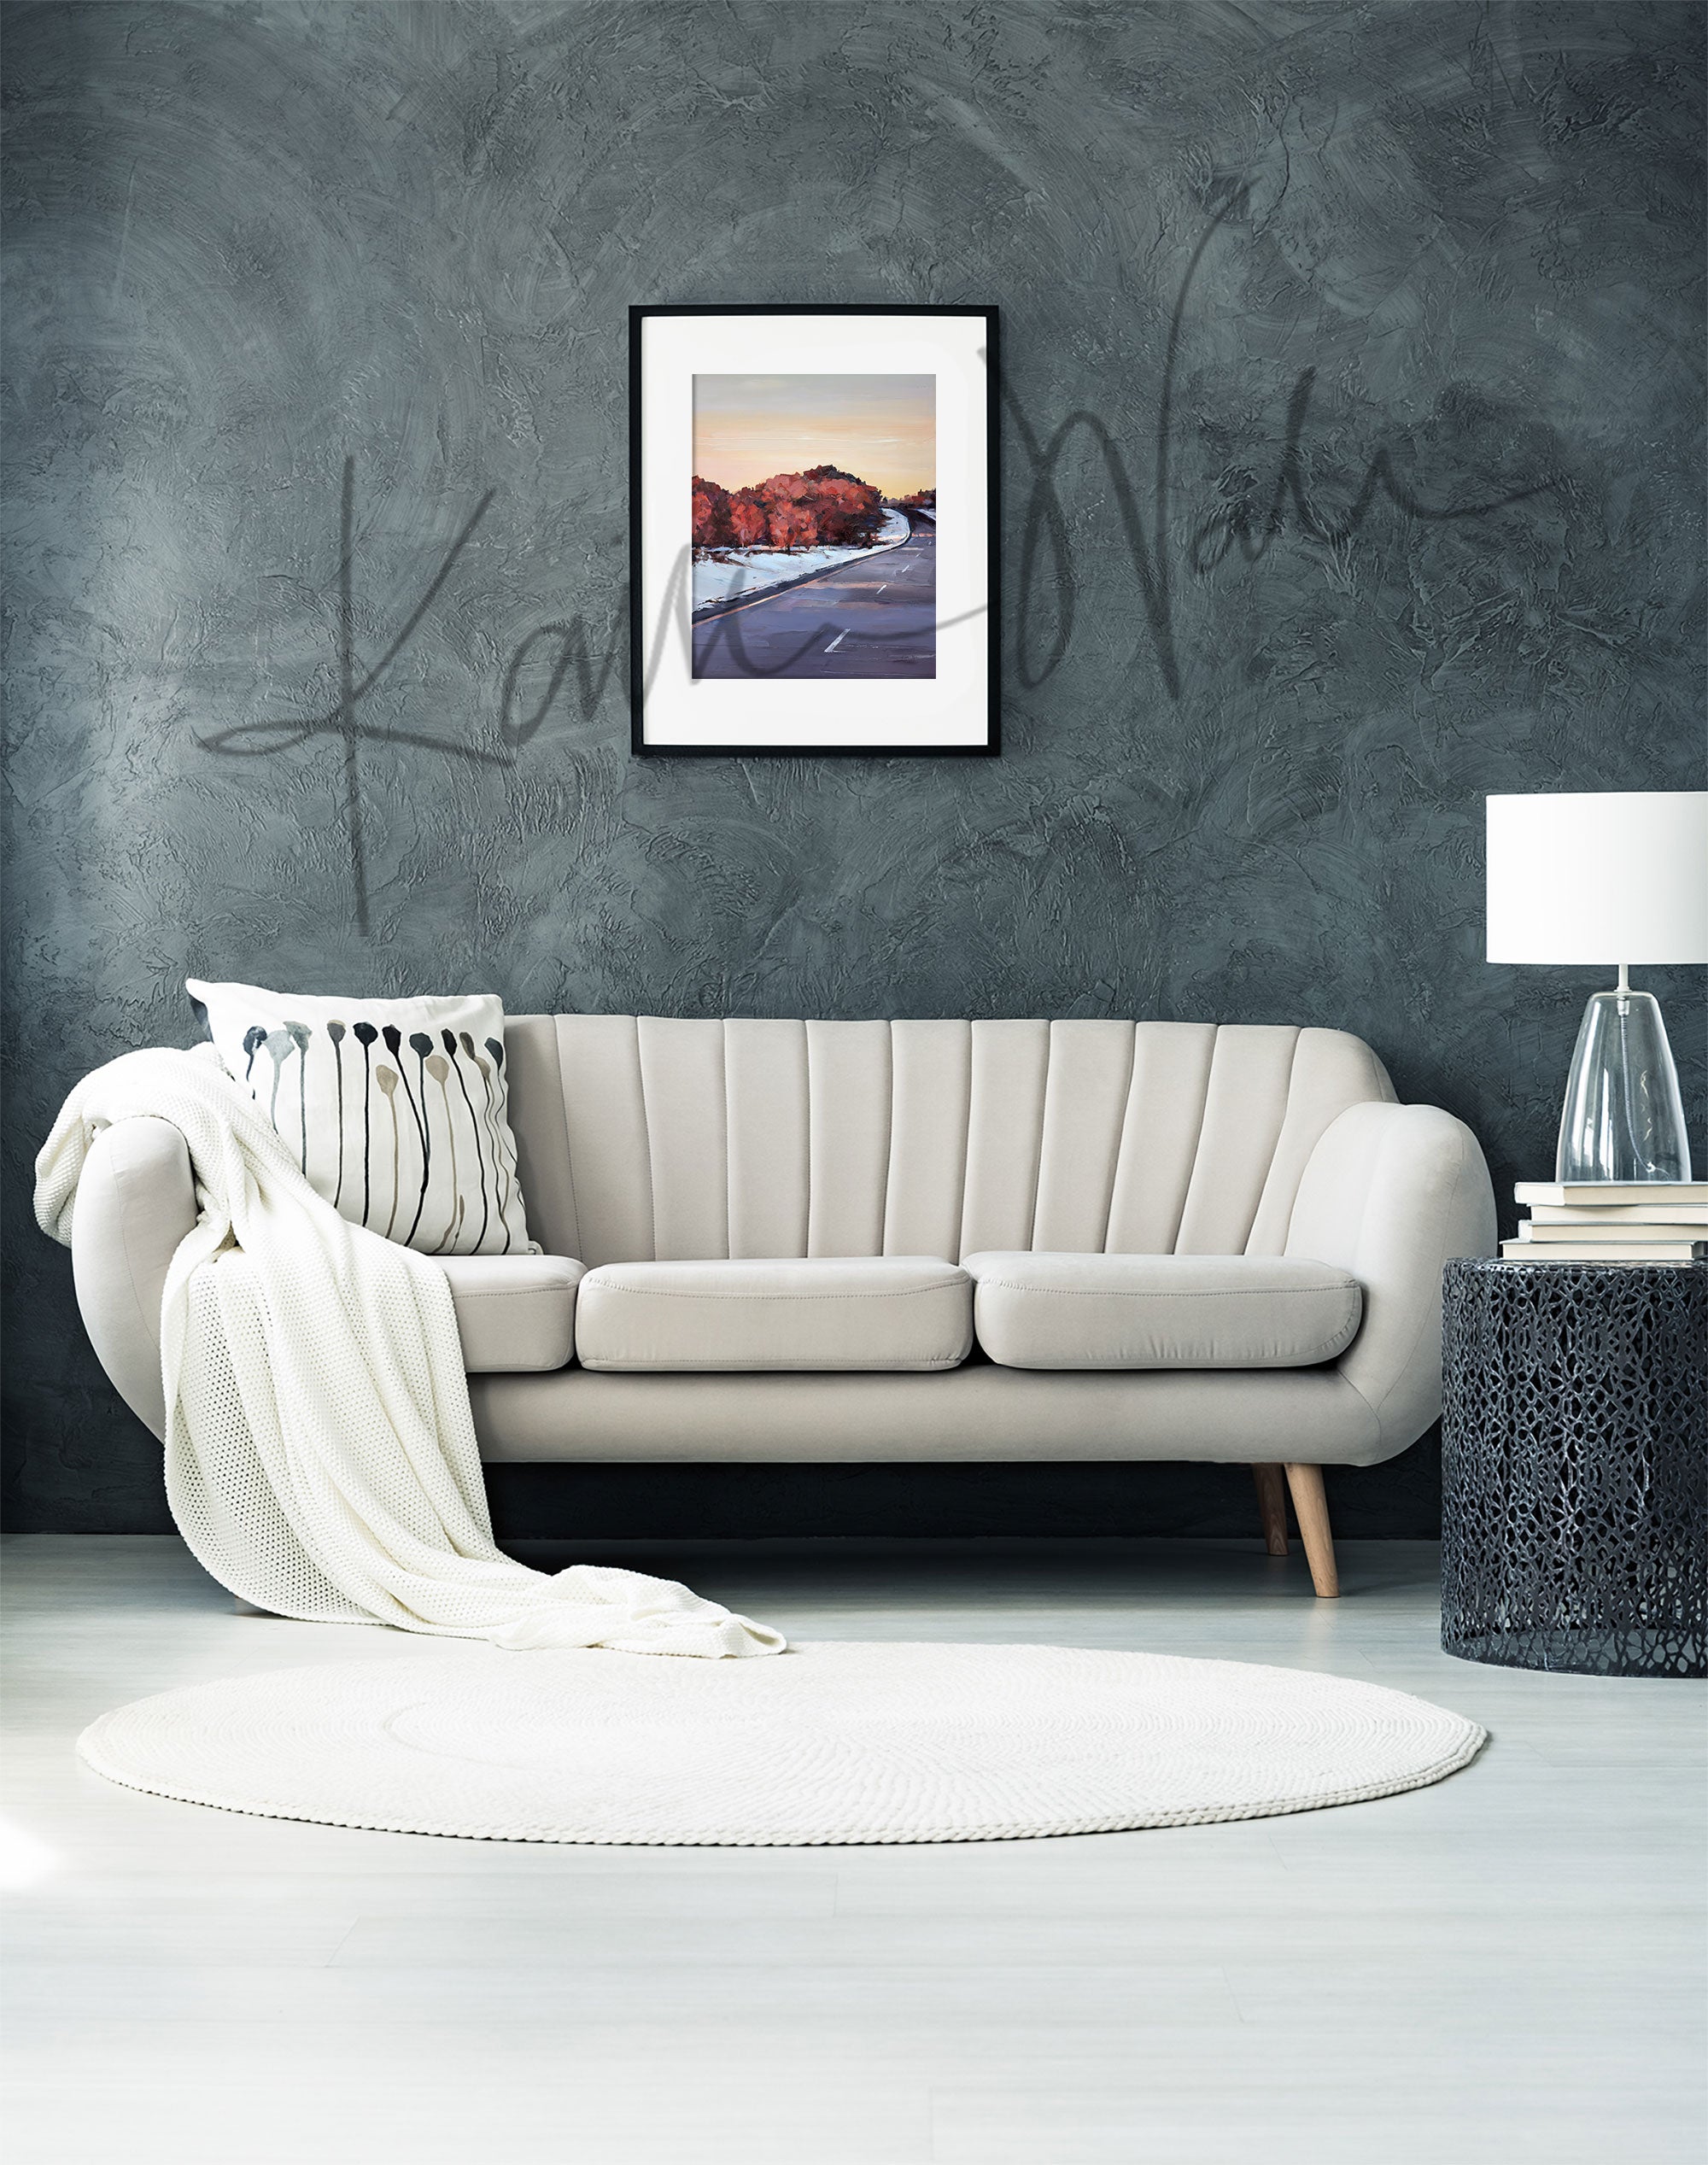 Framed watercolor painting of a snowy Wisconsin landscape in the spring. The painting is hanging over a white couch.